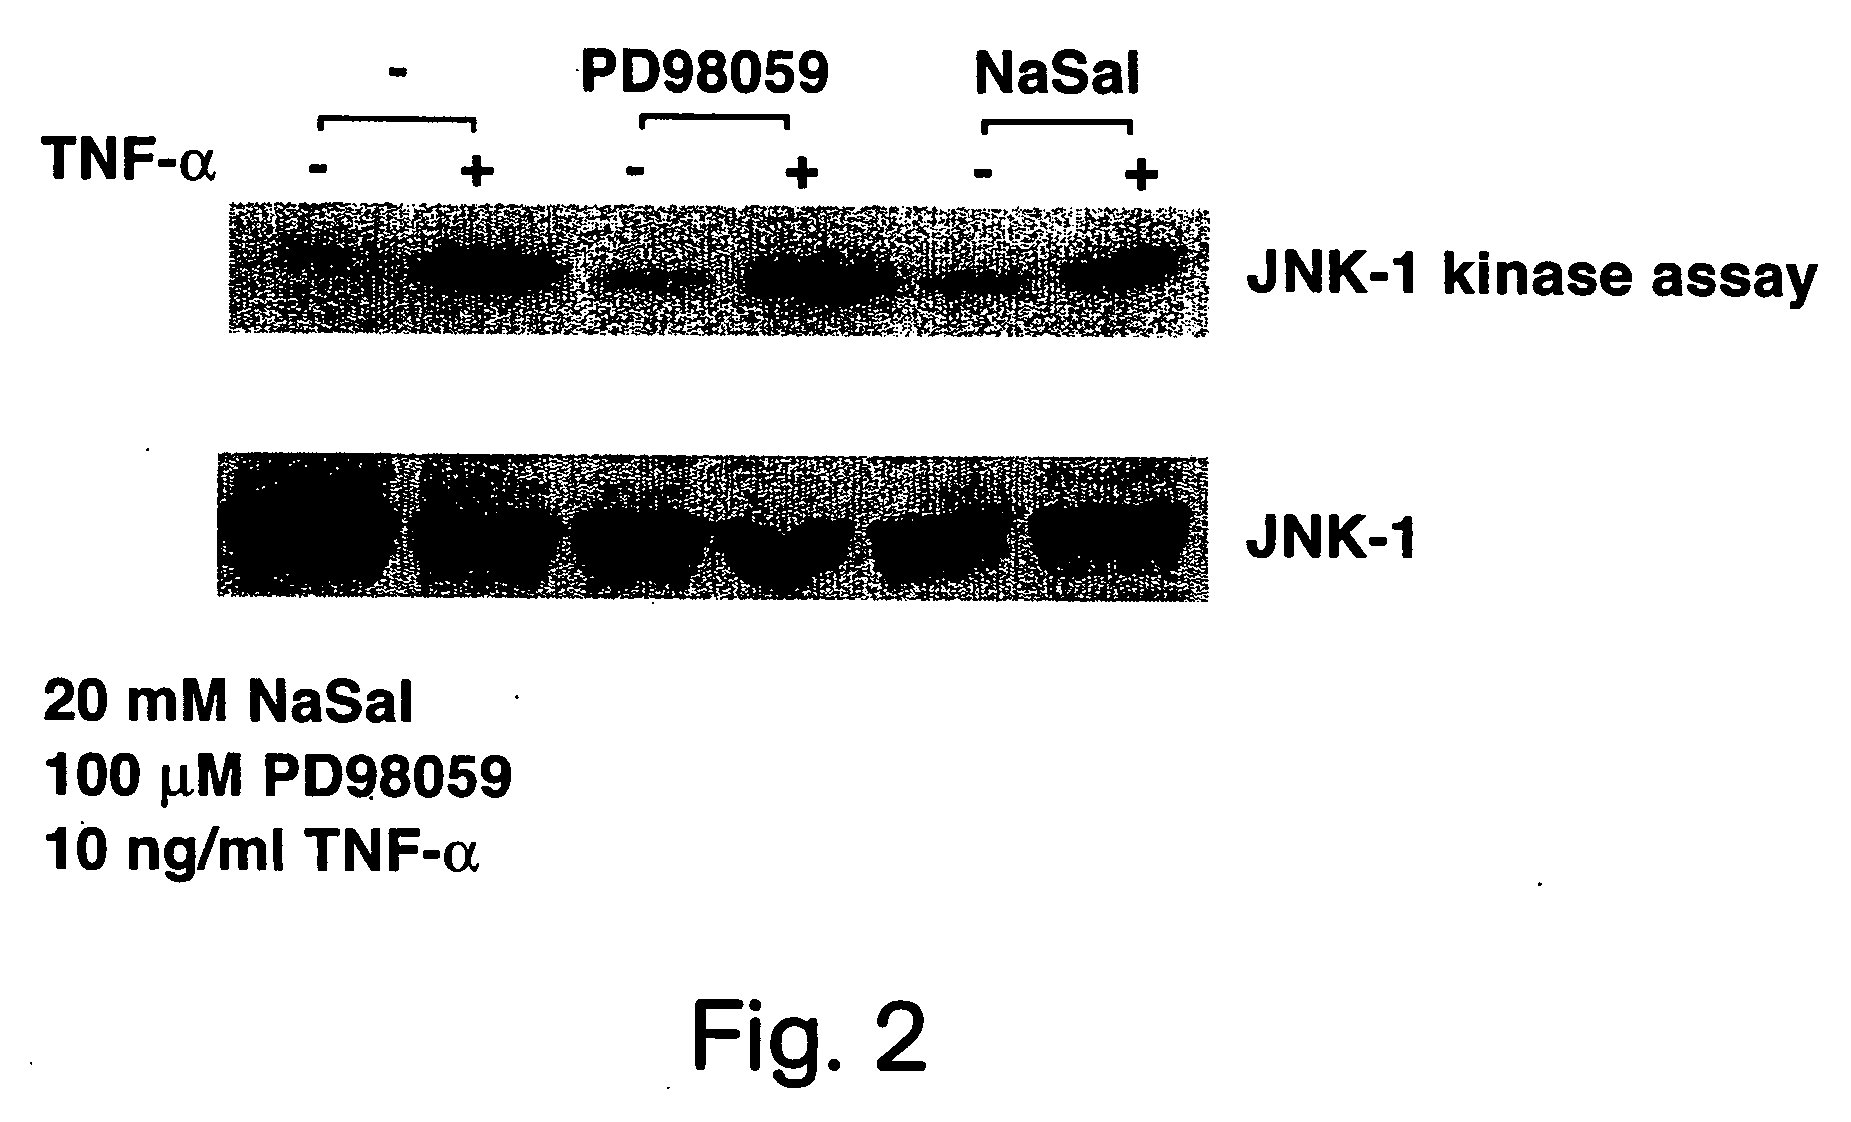 Methods for treating and preventing insulin resistance and related disorders